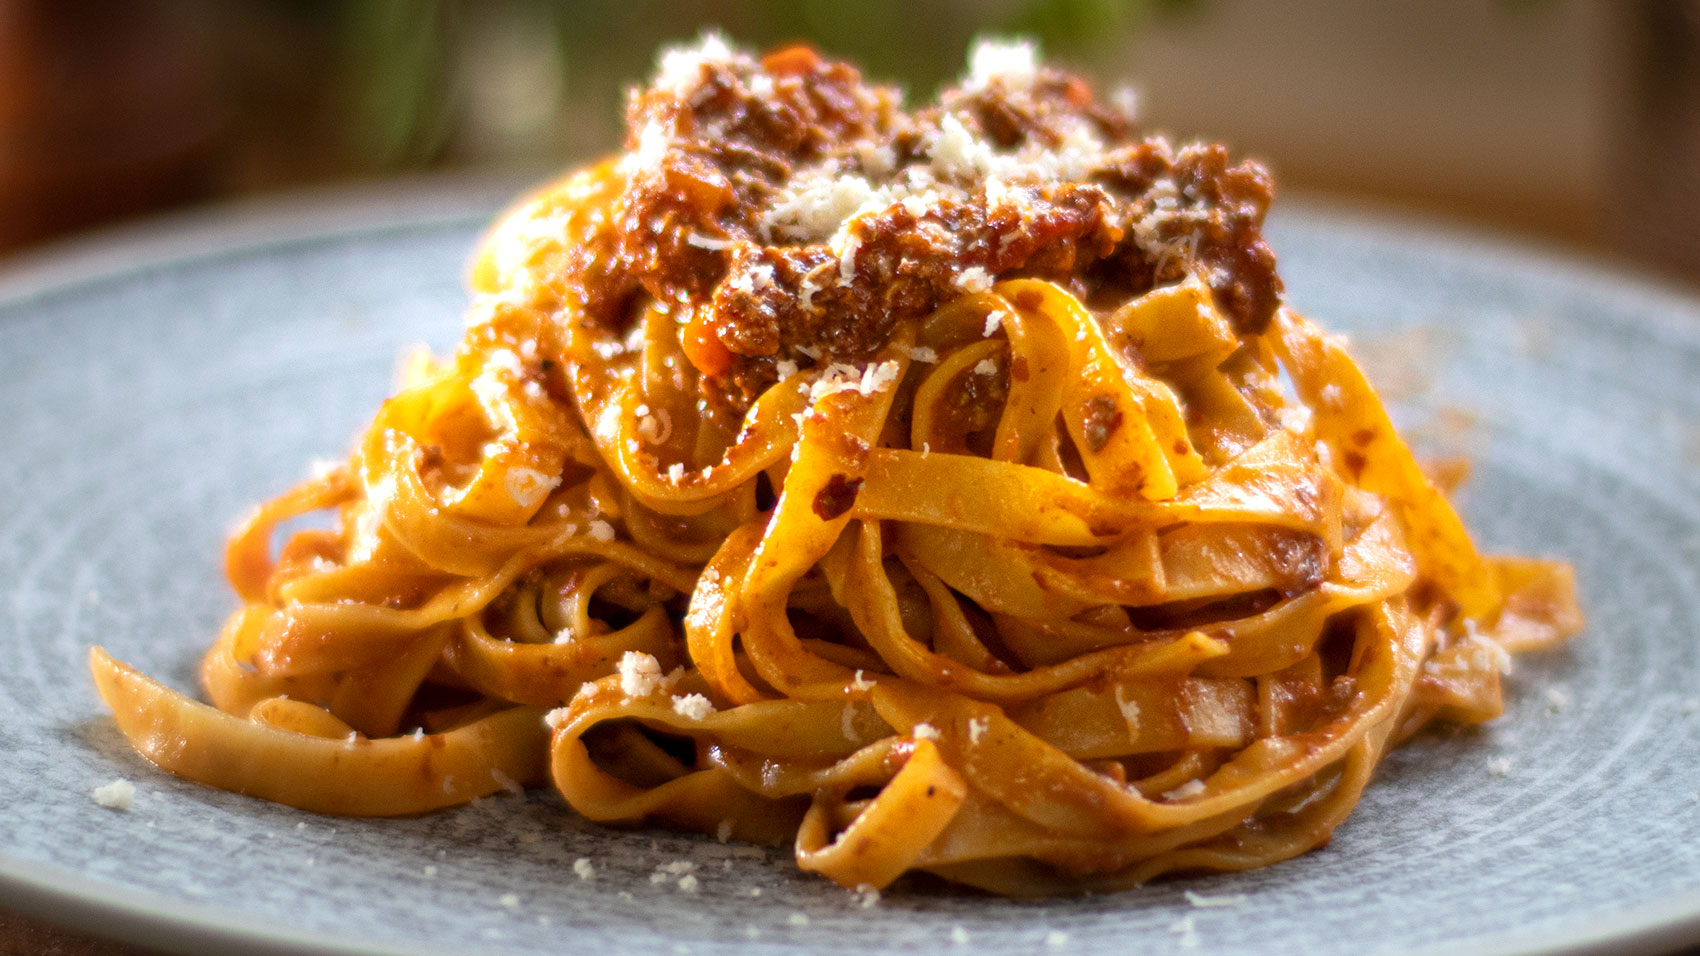 ragù alla bolognese - Easy Meals with Video Recipes by Chef Joel Mielle -  RECIPE30